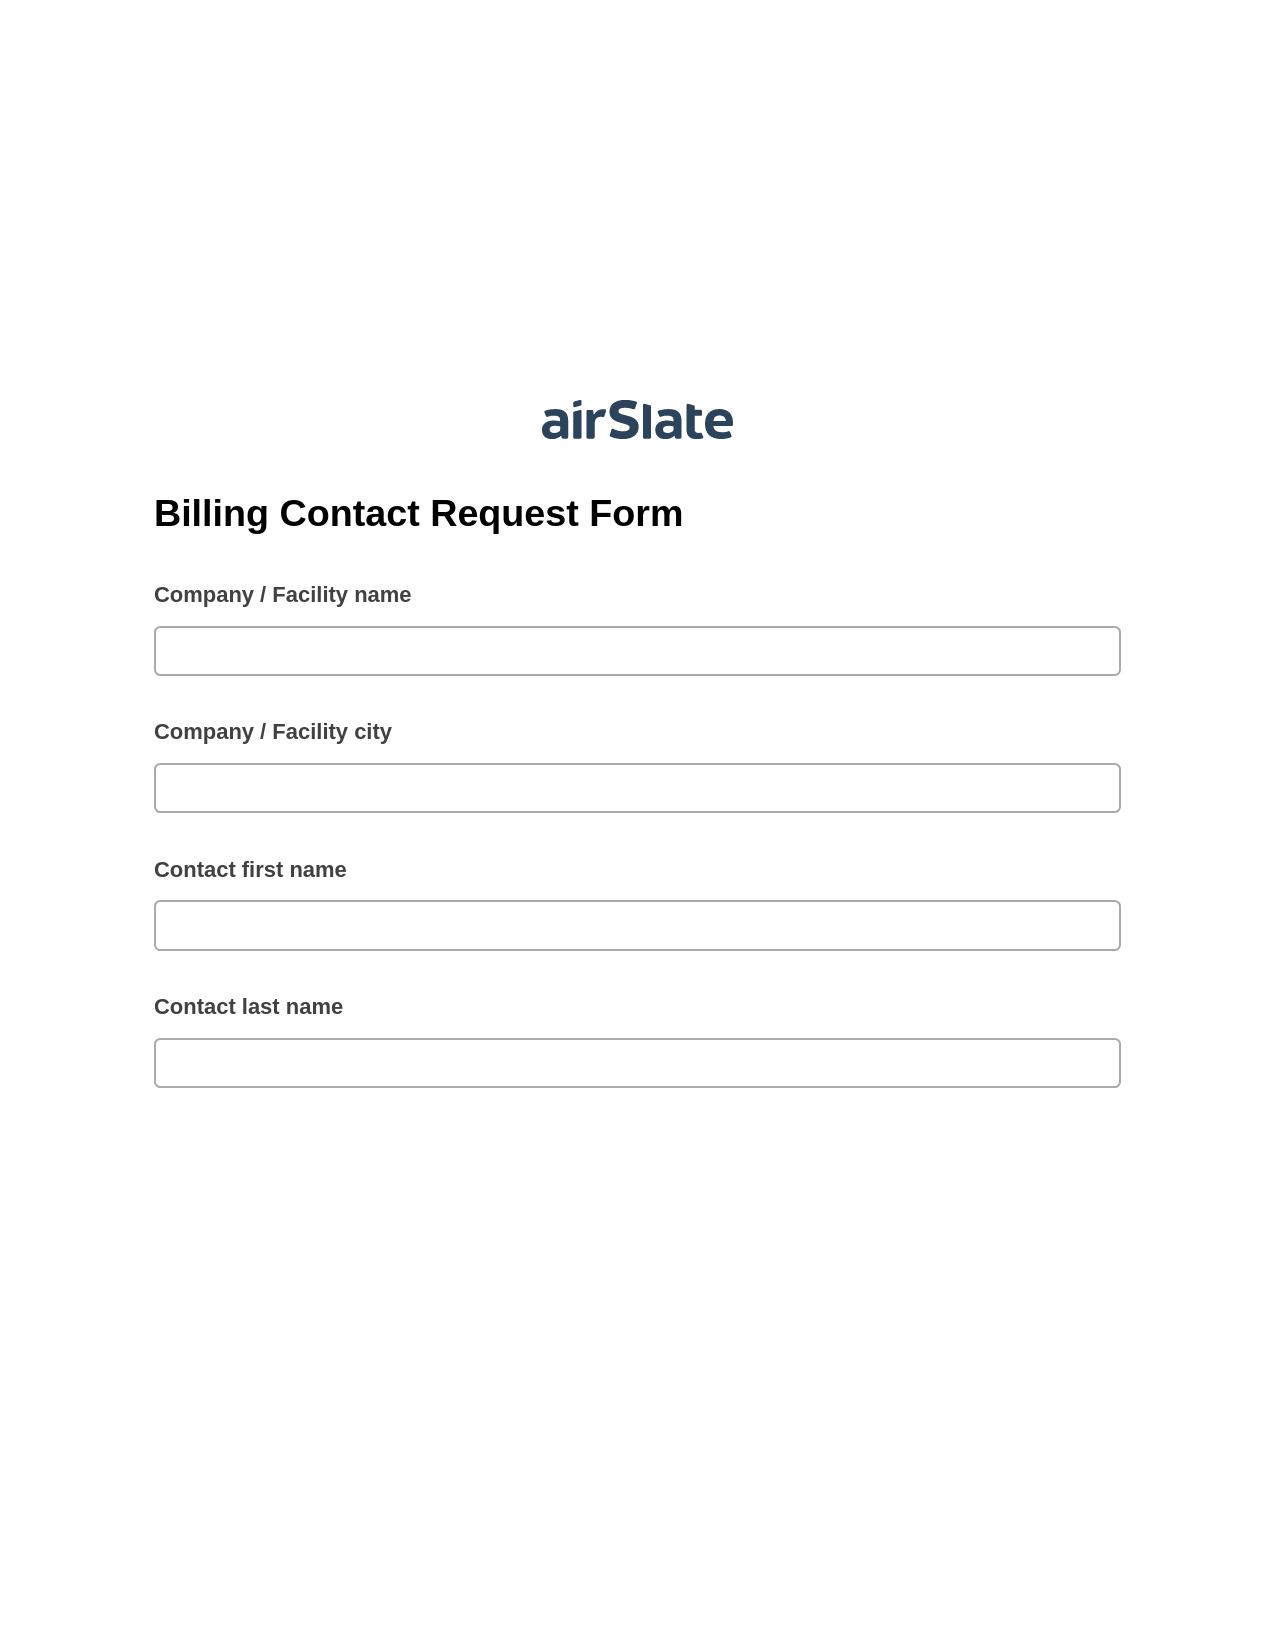 Billing Contact Request Form Pre-fill from CSV File Bot, Hide Signatures Bot, Archive to SharePoint Folder Bot